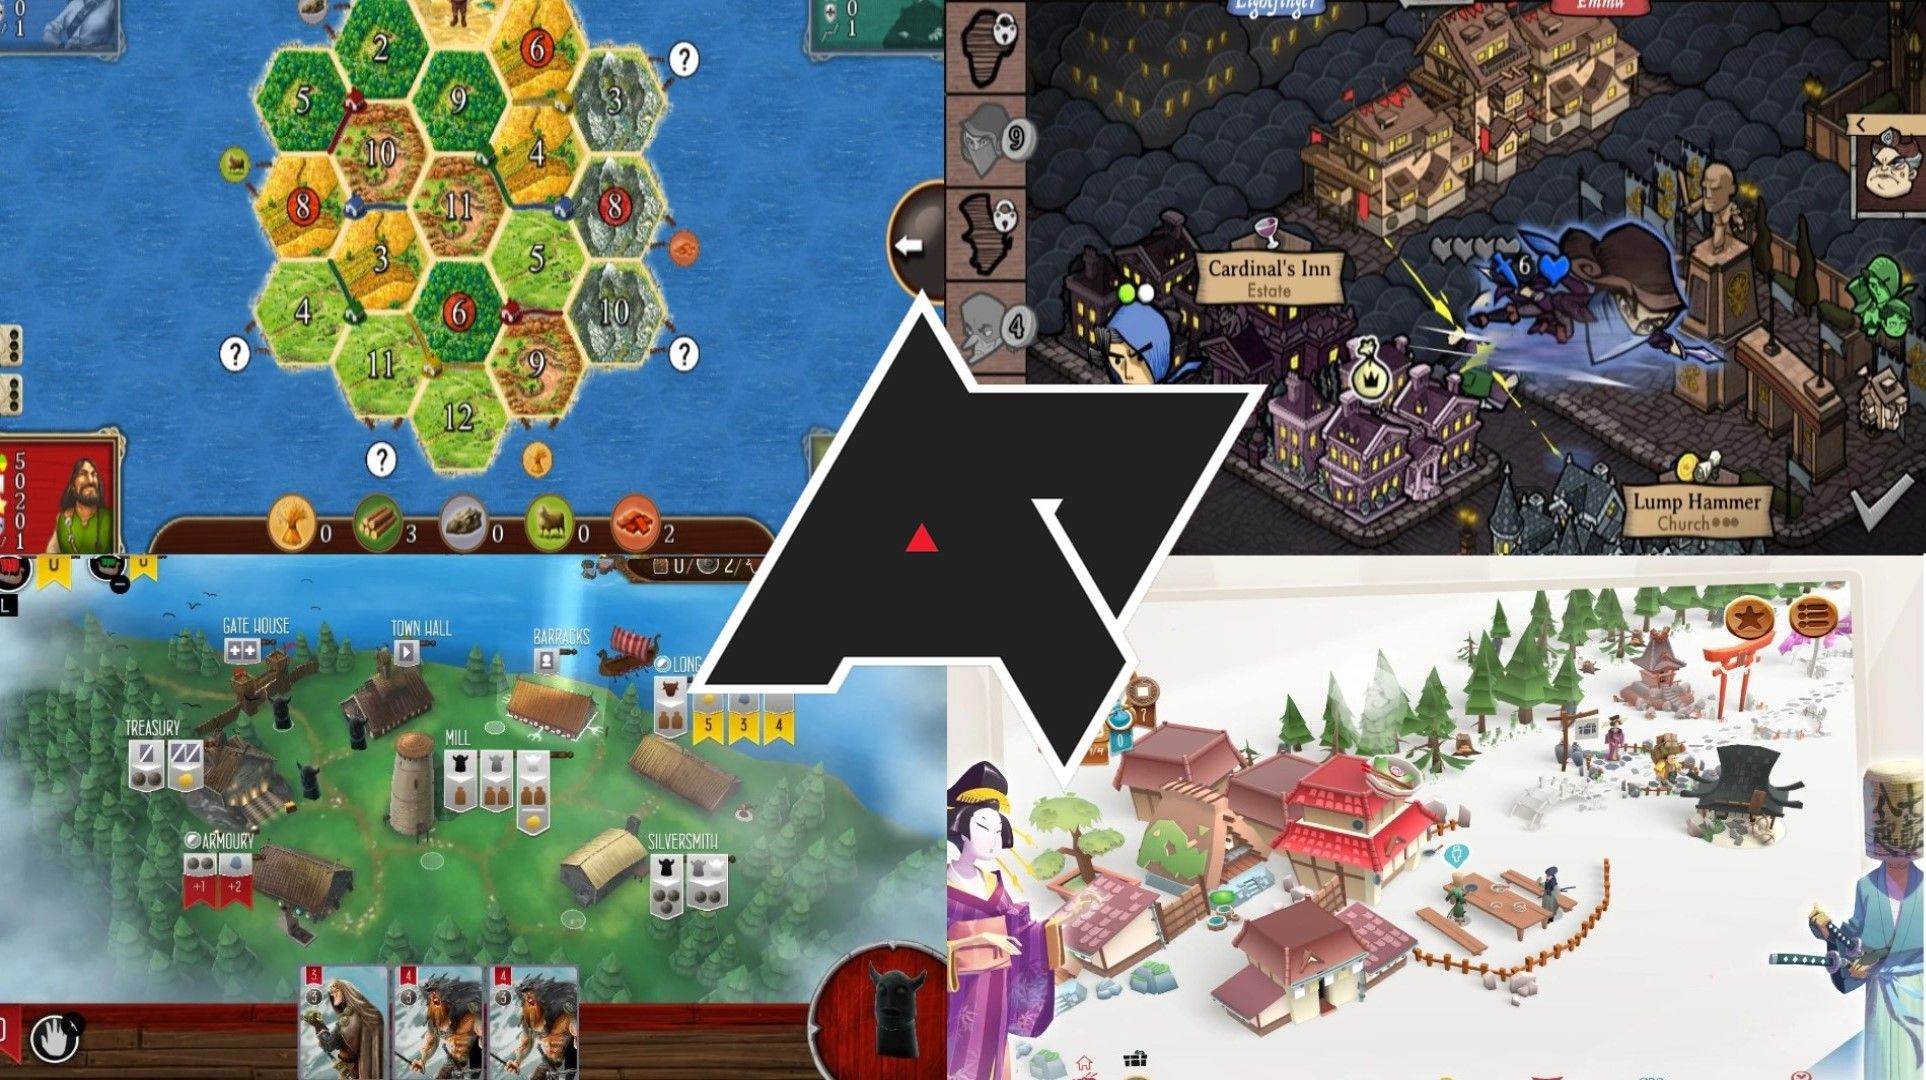 Classic Board Games to Play Online, on Mobile With Friends